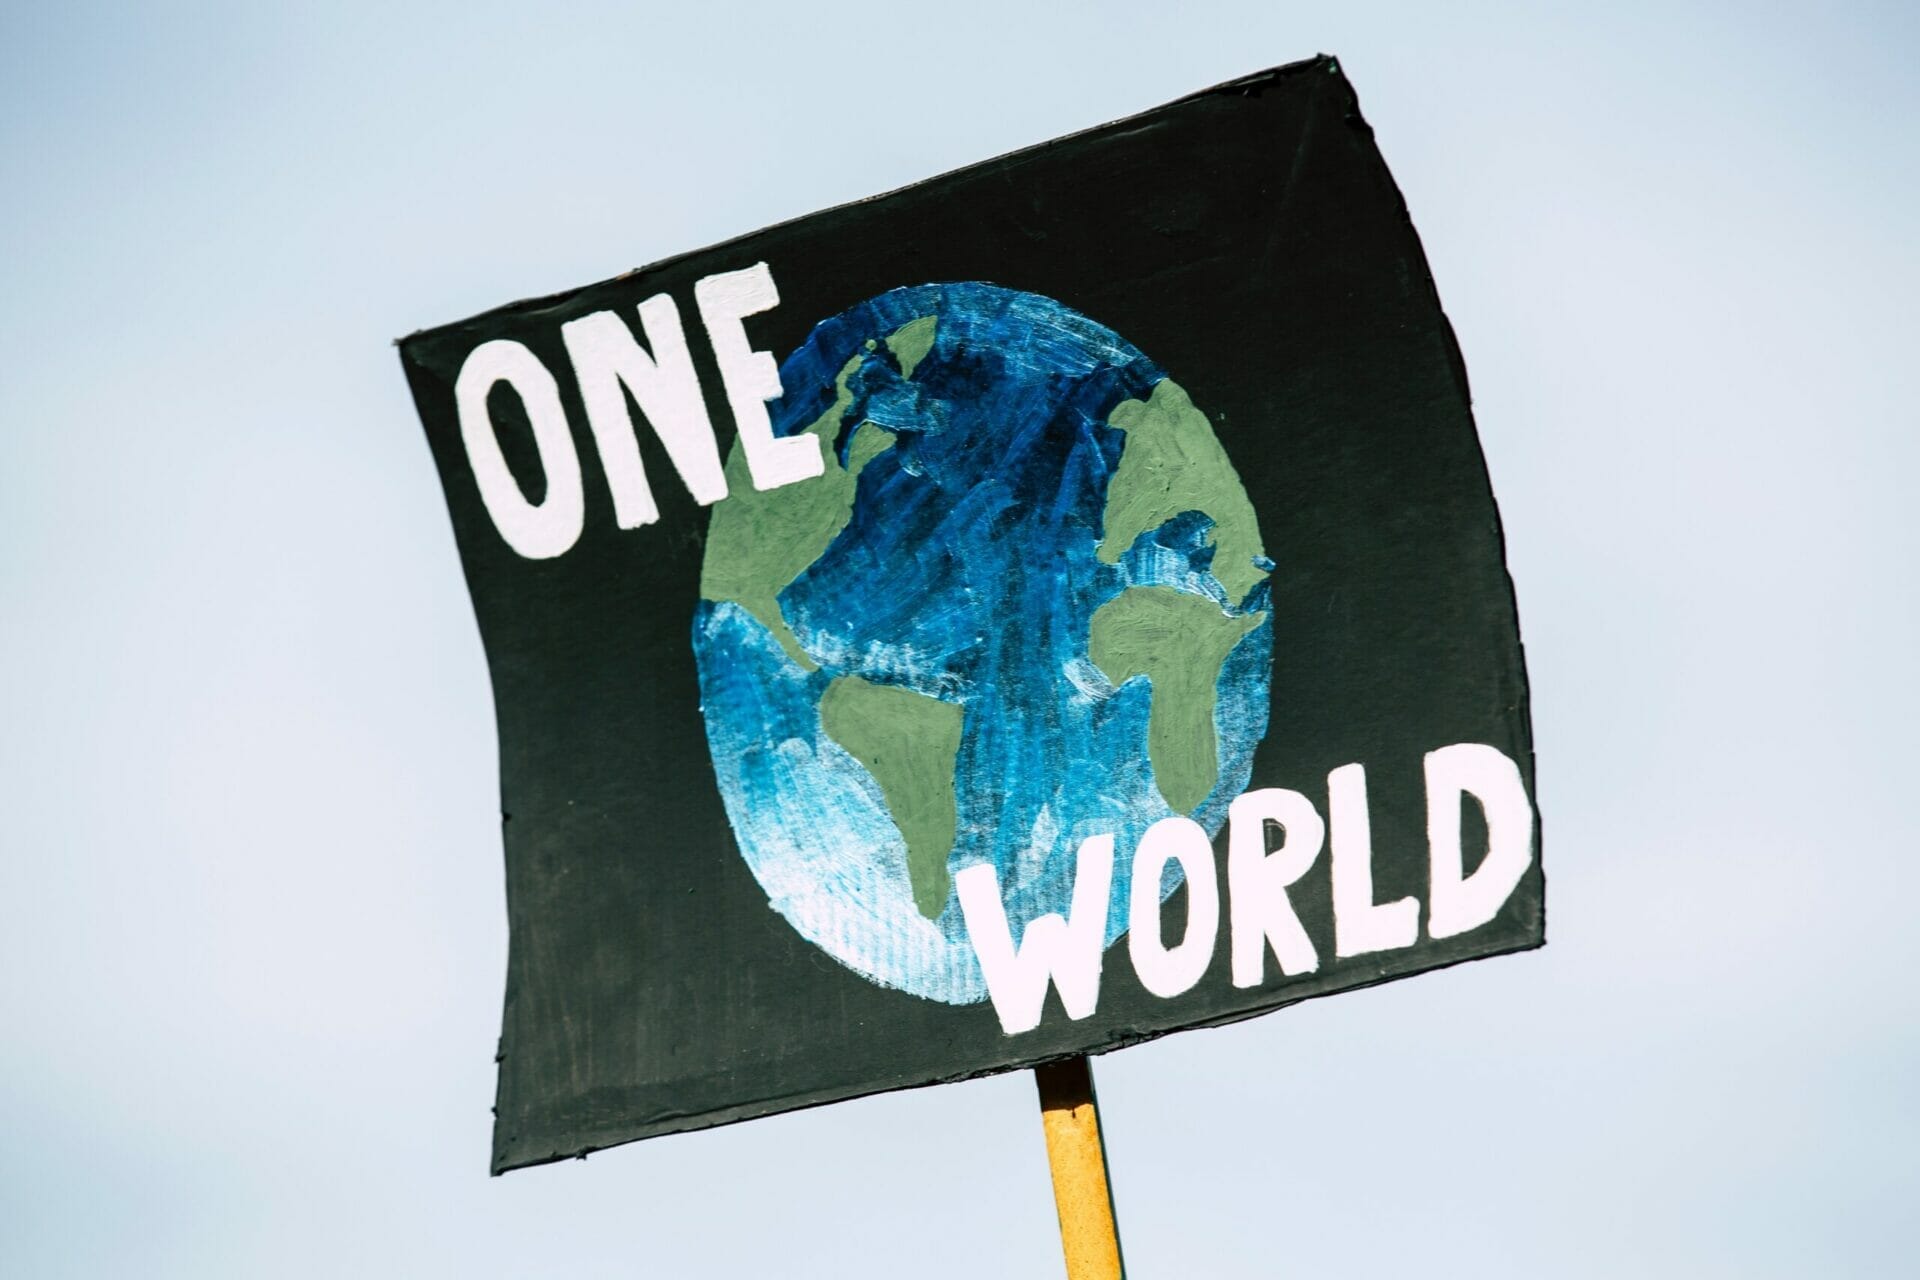 Protest sign painted with image of the Earth and text "One World"